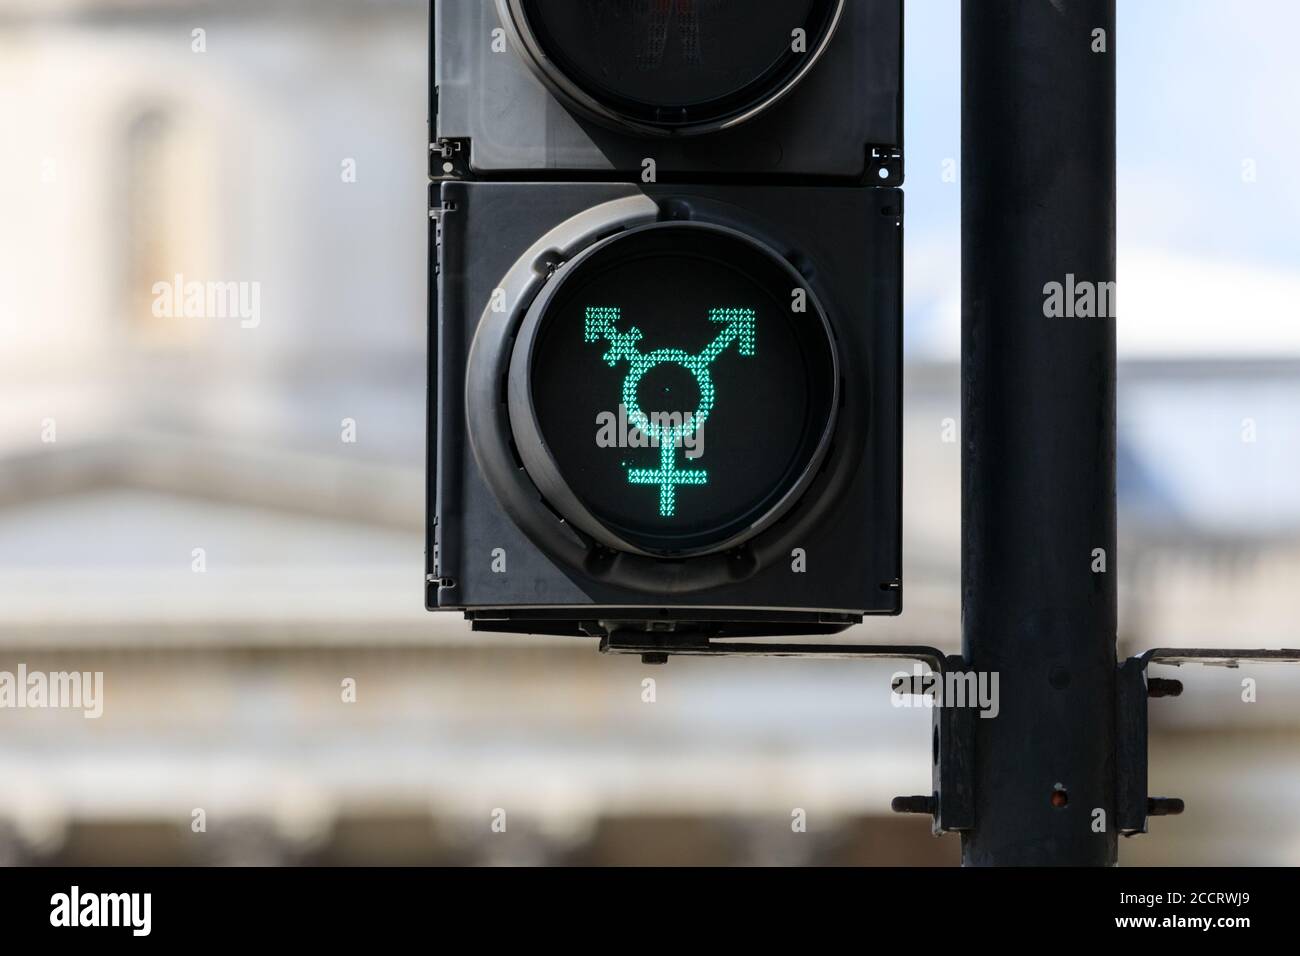 ‘Gay’ traffic light filters, gender neutrality sign brought in for Gay Pride, Trafalgar Square, London, UK Stock Photo